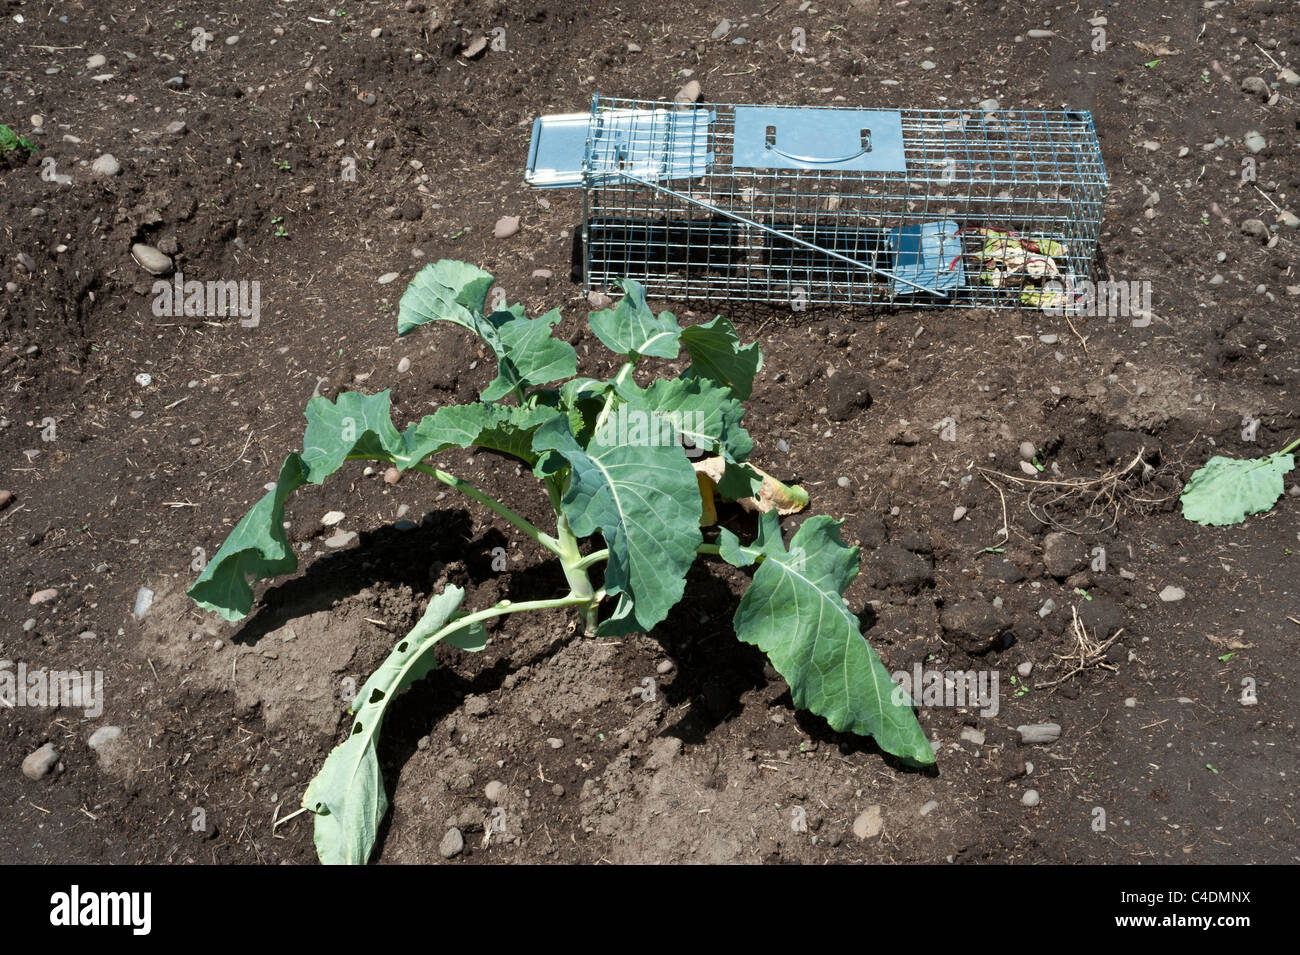 https://c8.alamy.com/comp/C4DMNX/a-trap-waits-next-to-a-kale-plant-in-the-garden-for-the-local-garden-C4DMNX.jpg